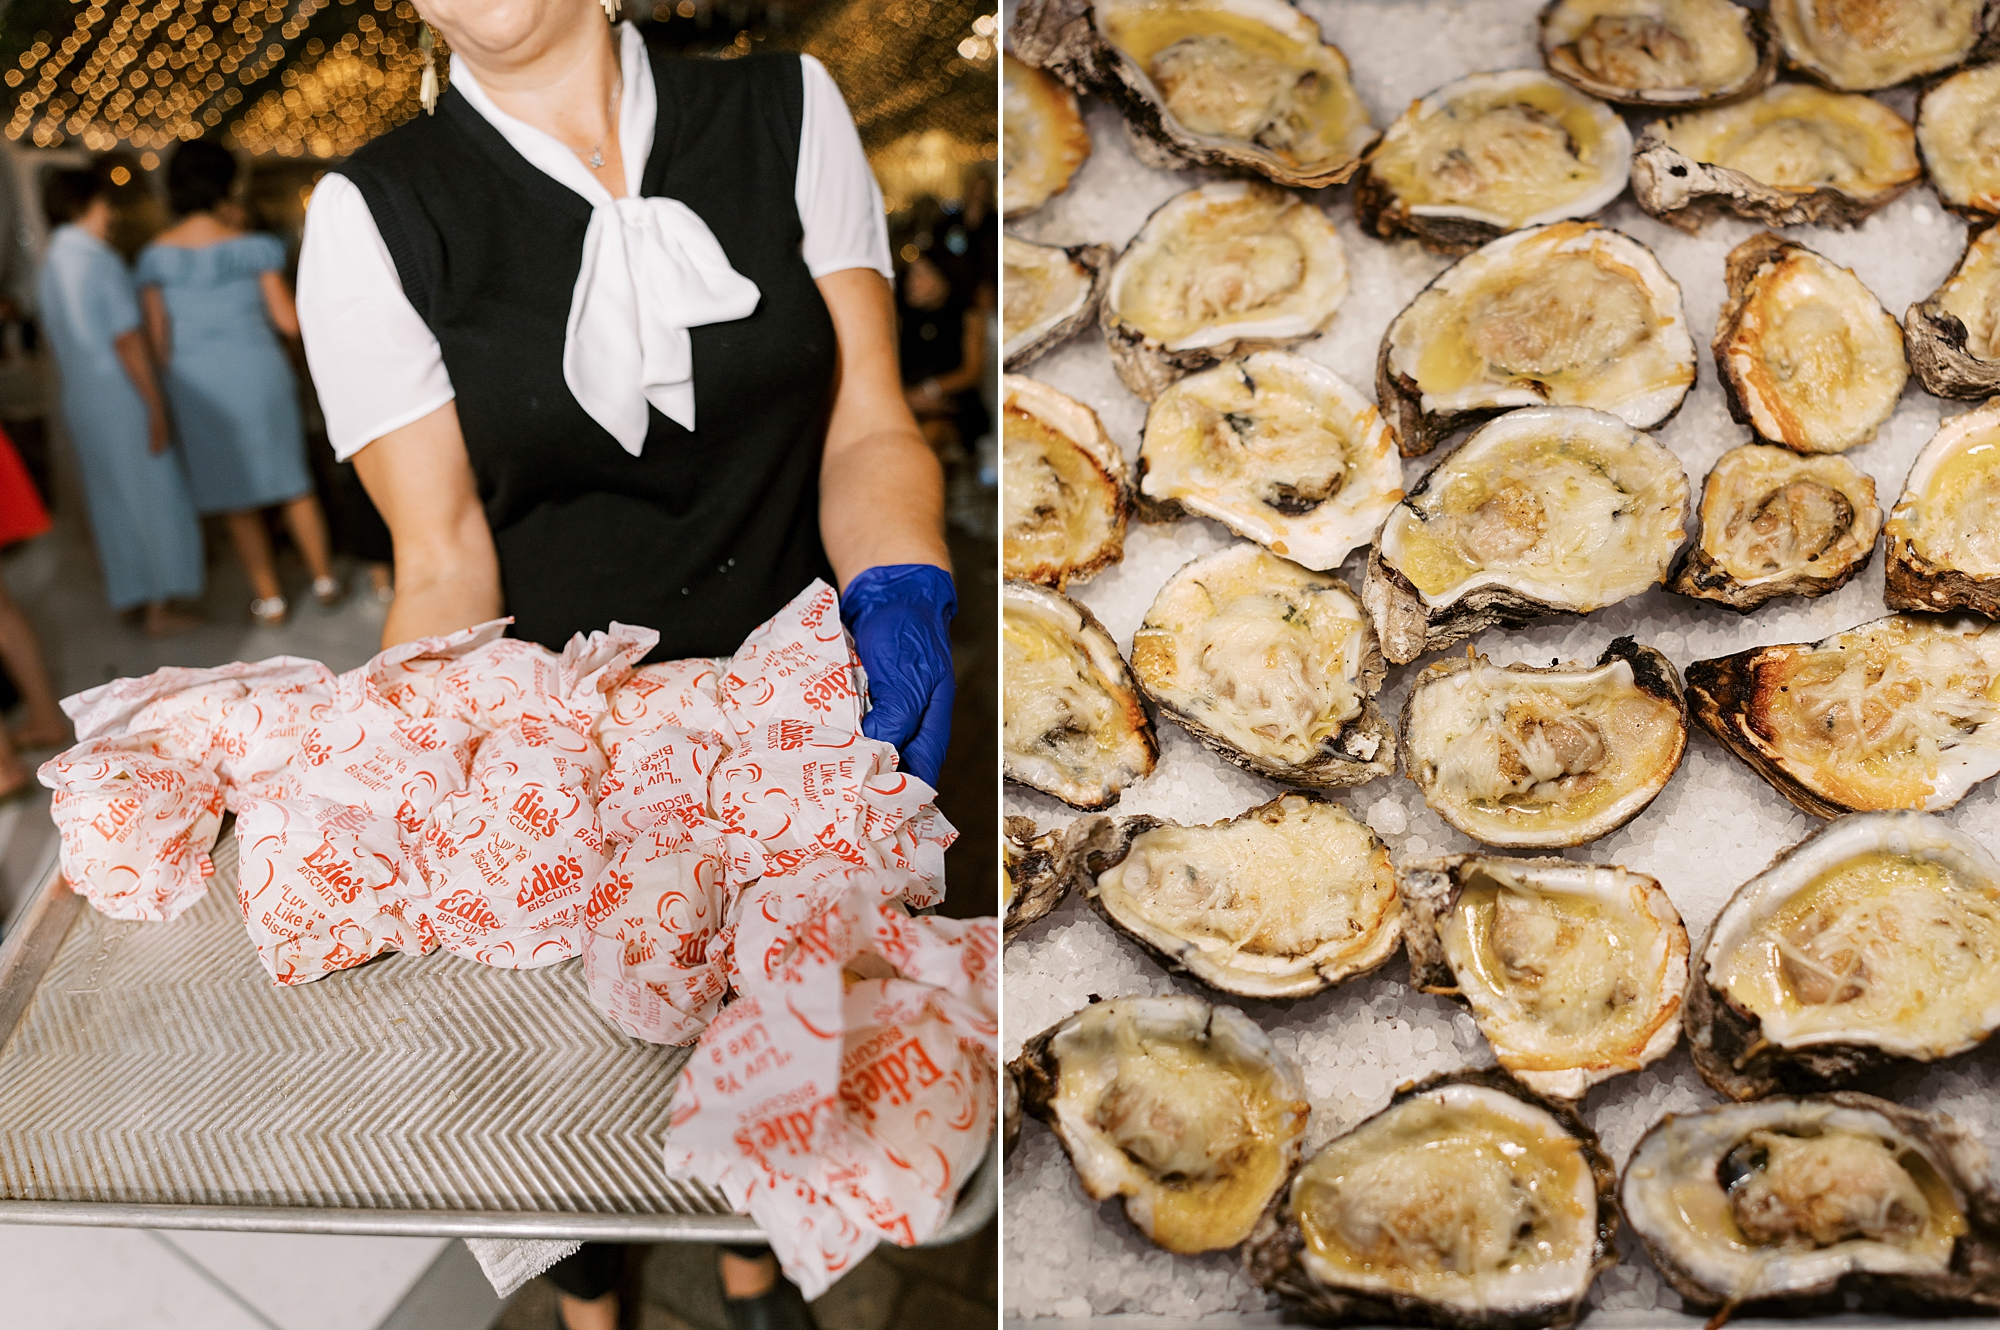 oysters and other appetizers at the University of Louisiana at Lafayette alumni center